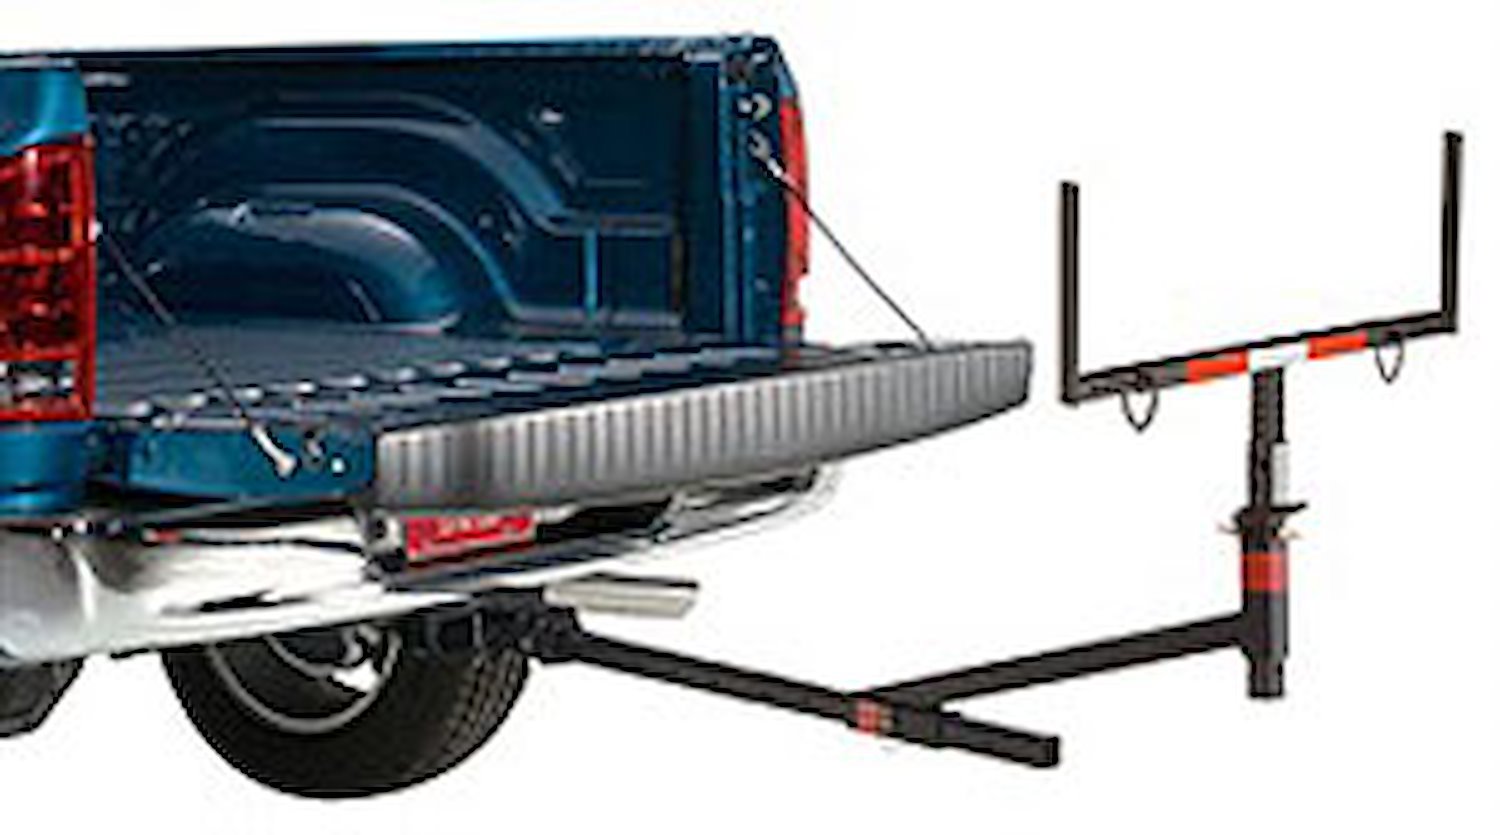 Hitch Rack Truck Bed Extender Adjustable from 27" to 49" Wide